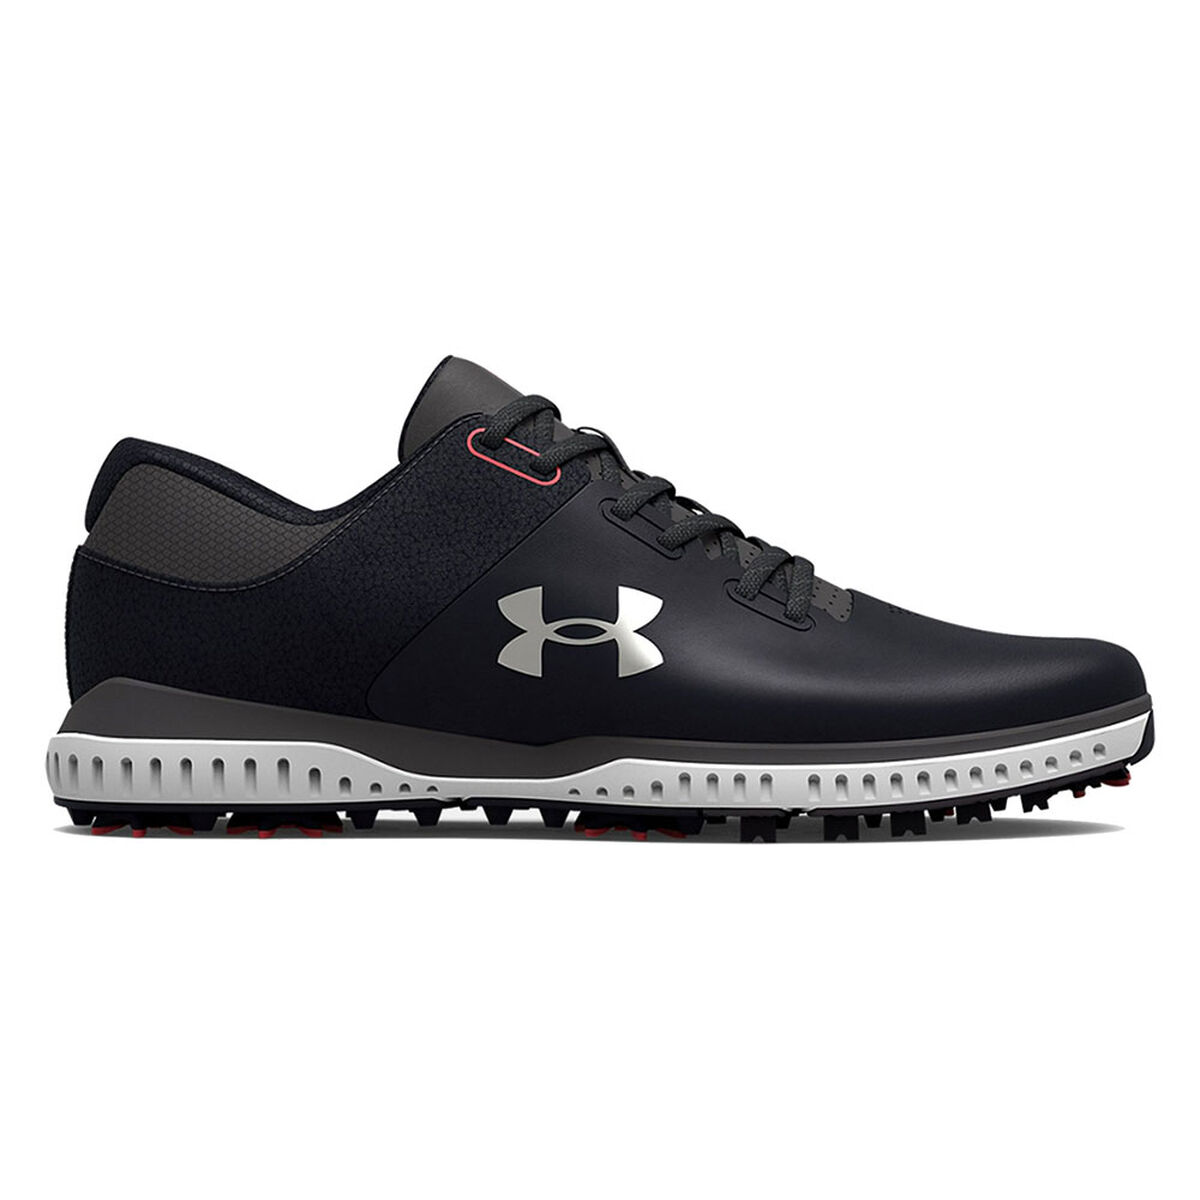 Under Armour Men’s Black Comfortable Medal RST Waterproof Spiked Golf Shoes, Size: 7 | American Golf